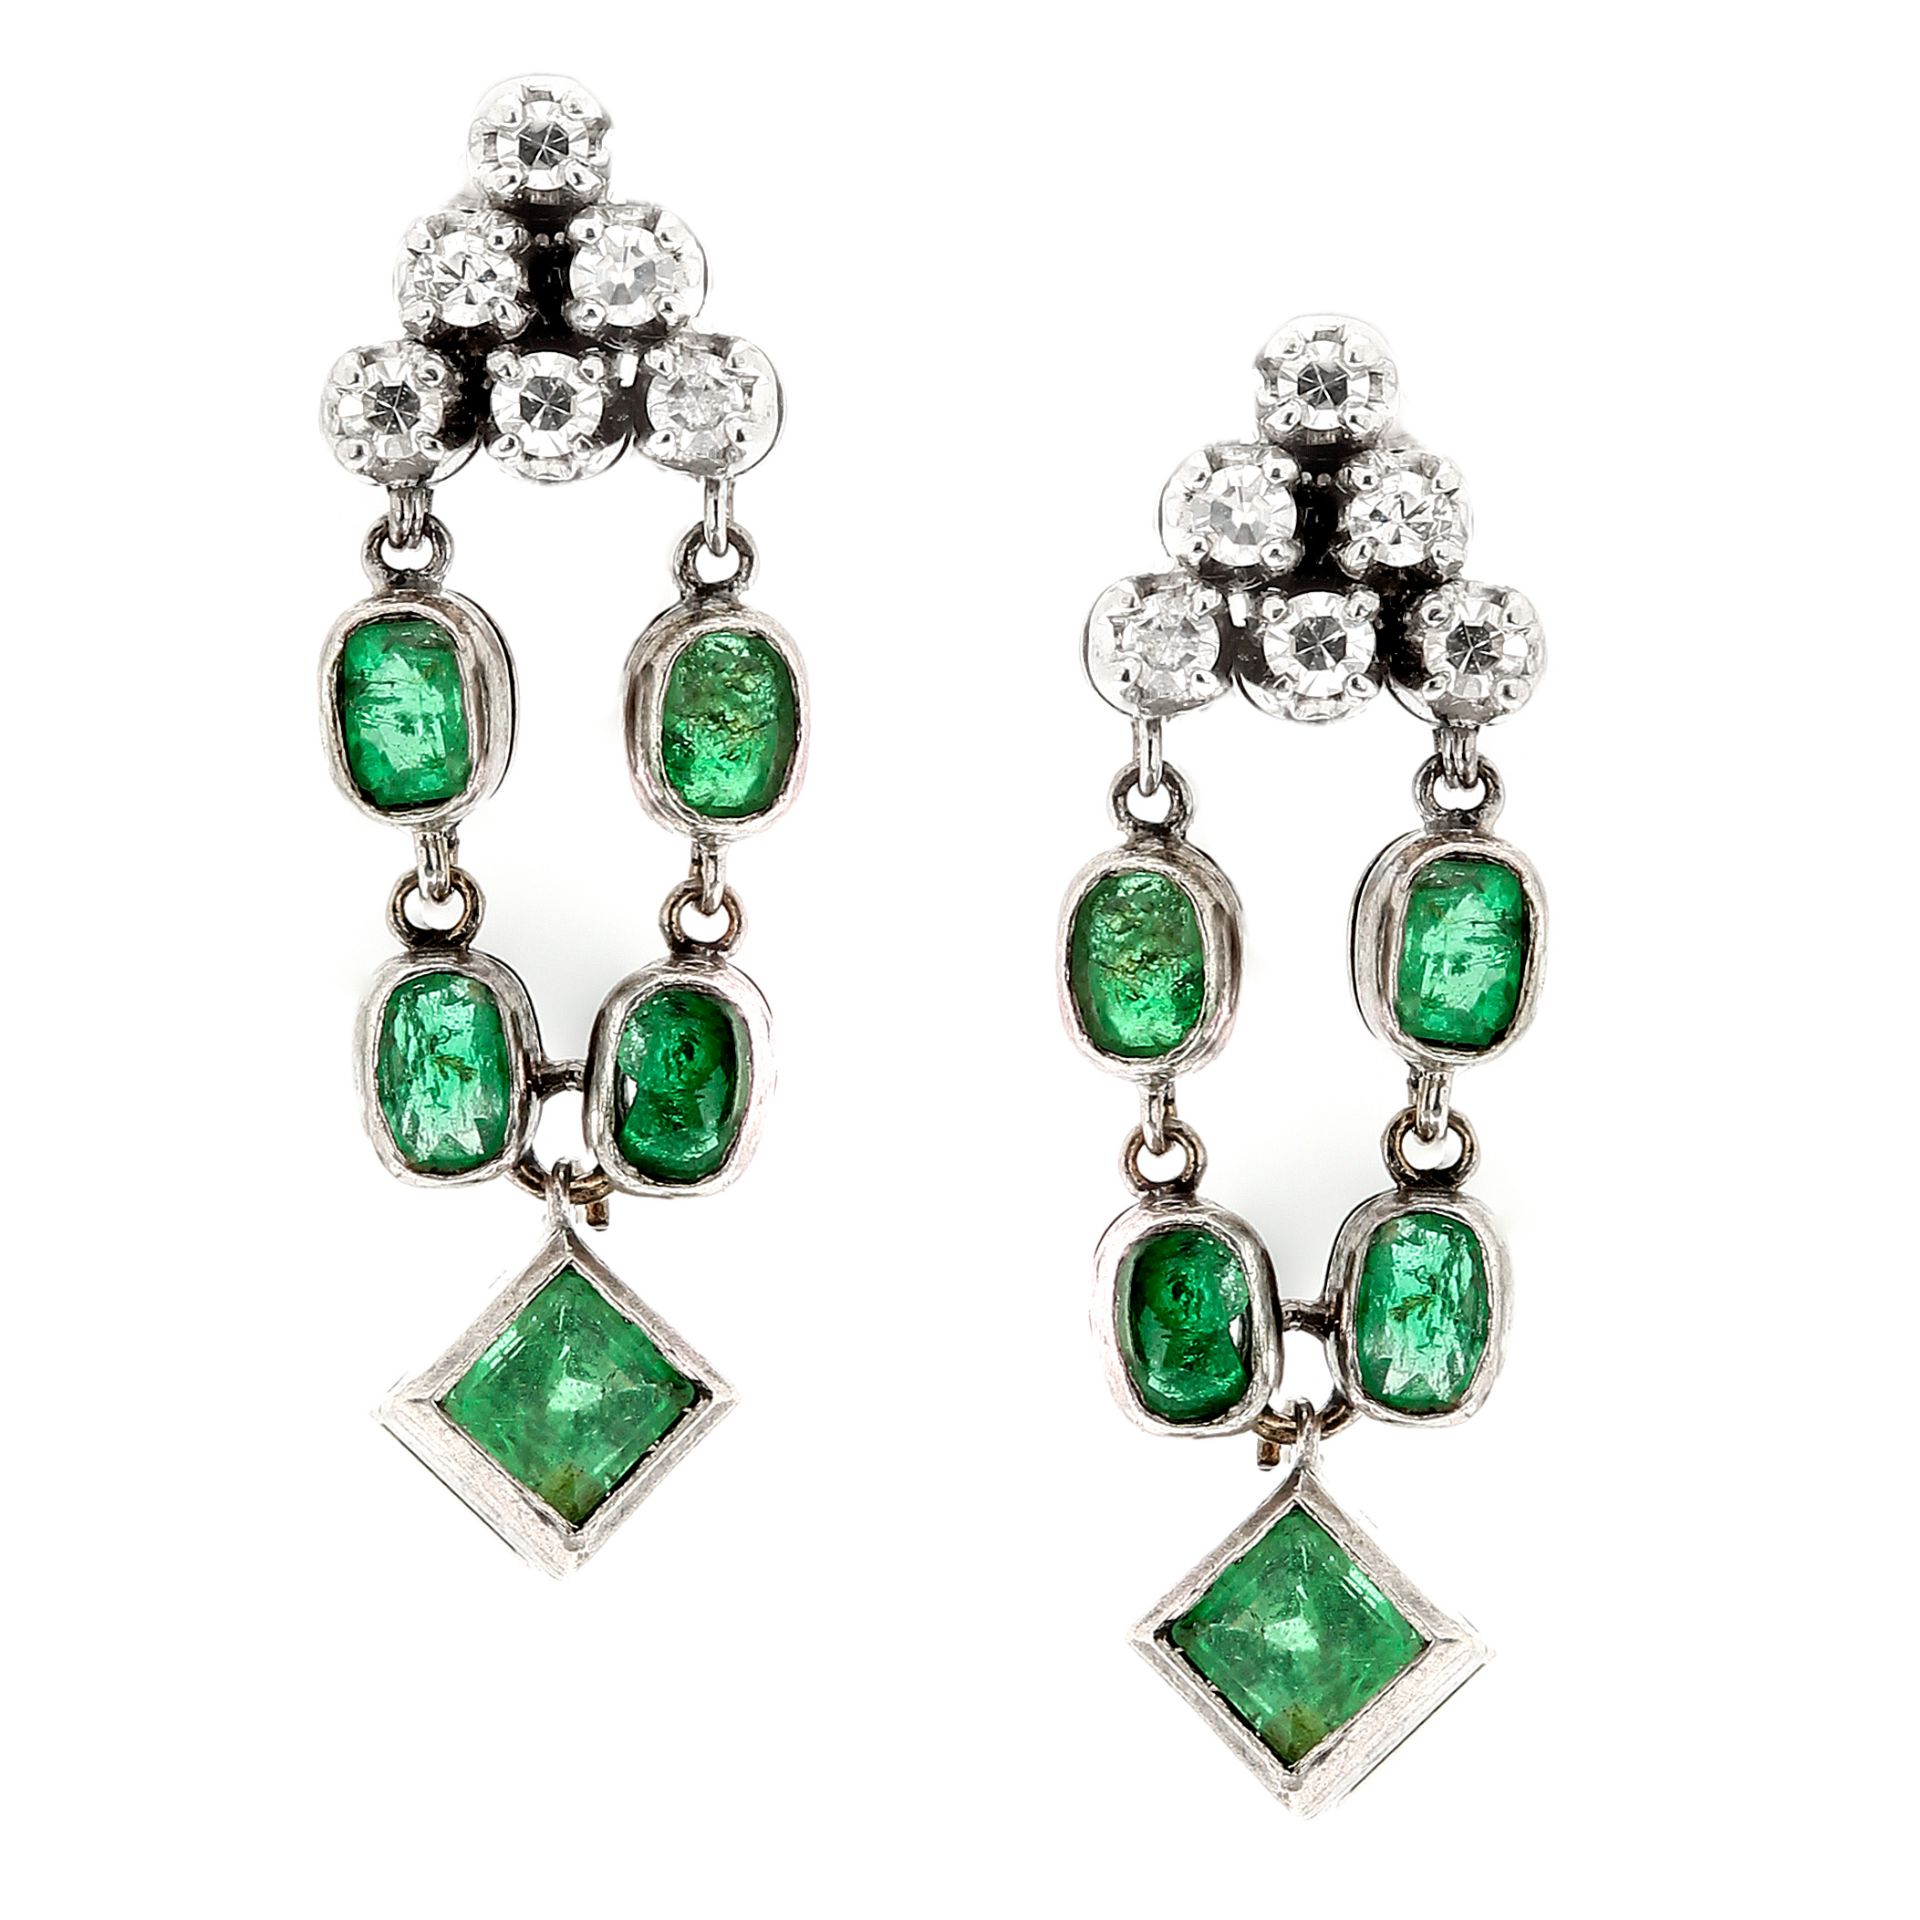 A PAIR OF EMERALD AND DIAMOND DROP EARRINGS in white gold or platinum, each with a triangular